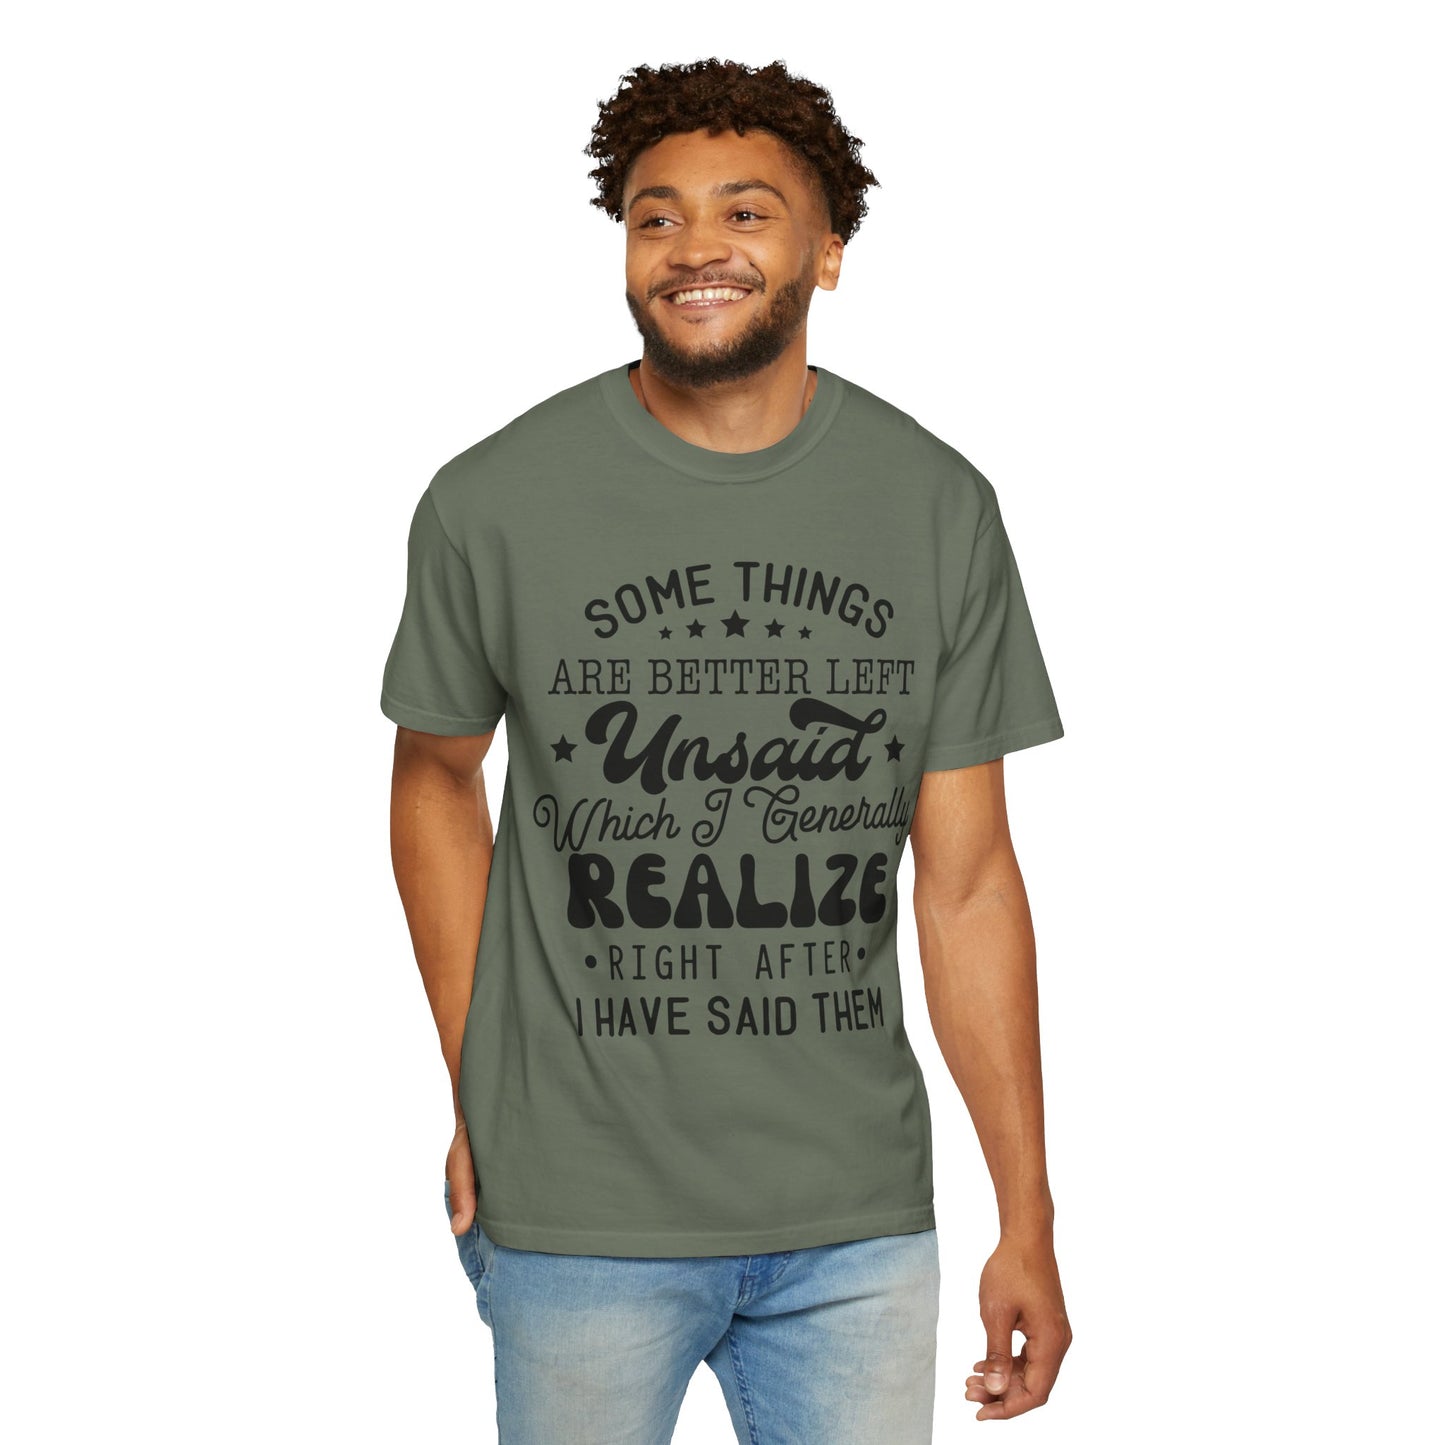 Somethings are better left unsaid - Unisex Garment-Dyed T-shirt